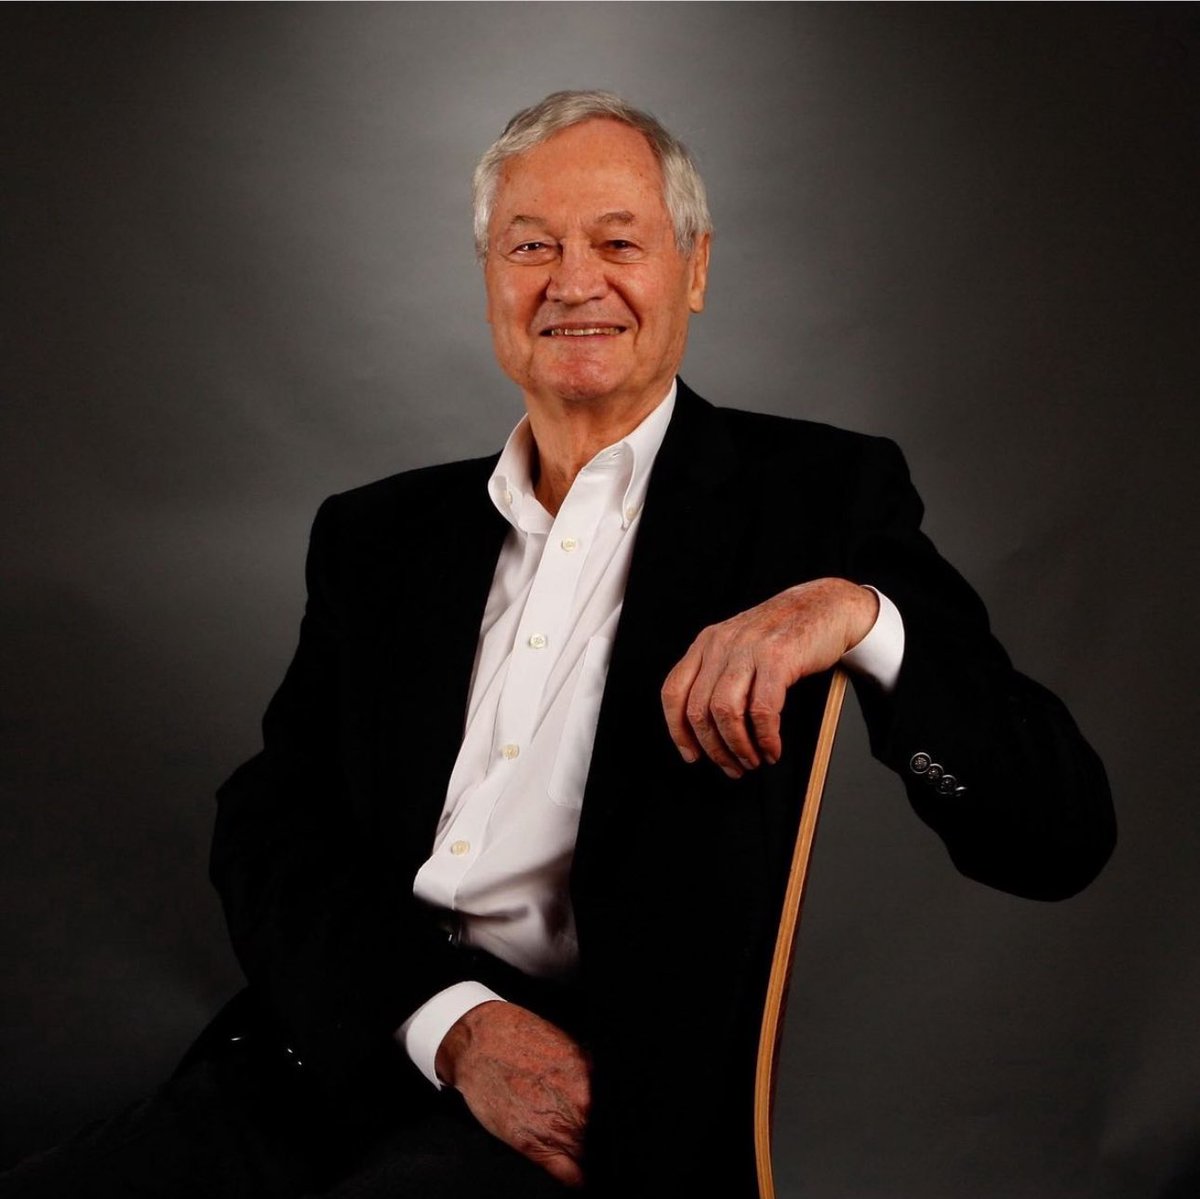 Rest In Peace Roger Corman. Thank you for giving me my first movie and starting my career. I am eternally grateful.